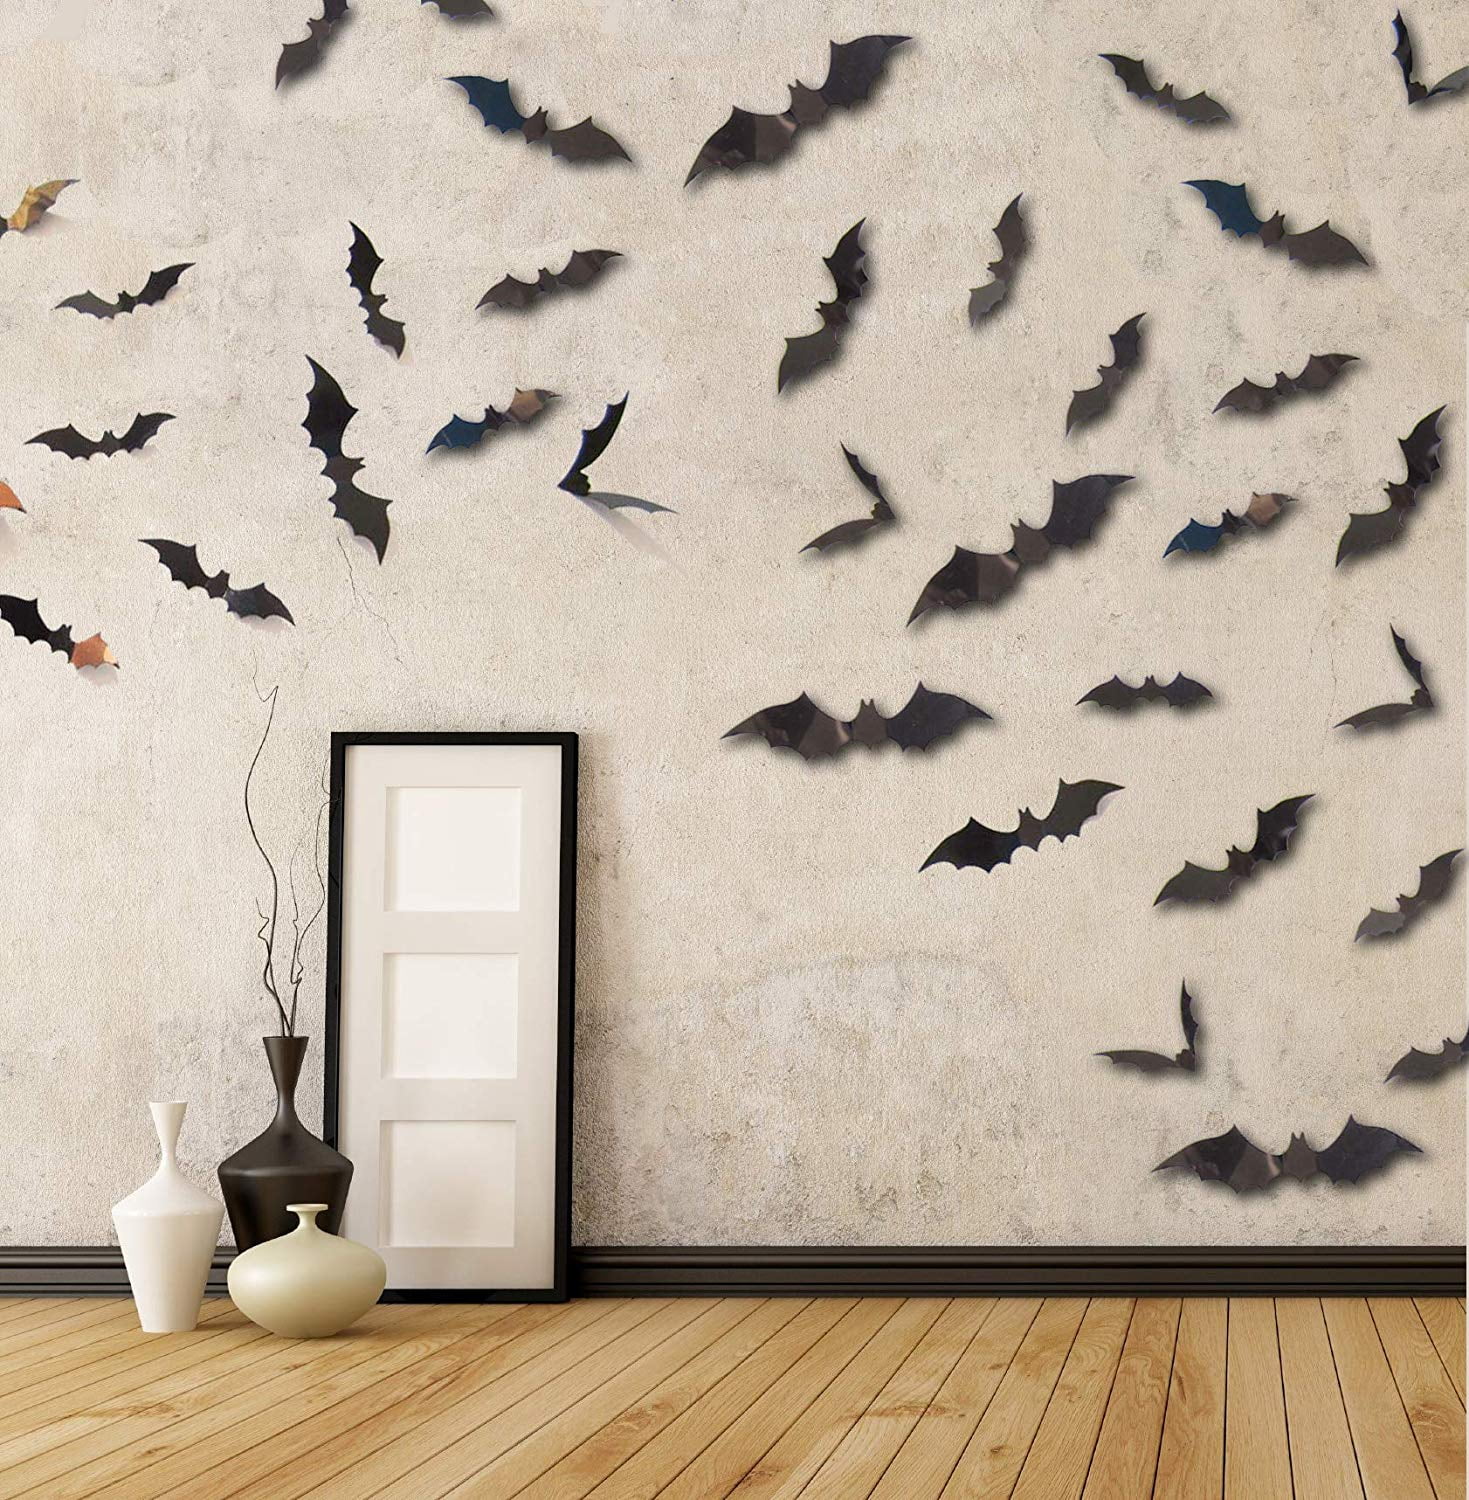 20 Halloween Scary 3D Flying Bats Wall Stickers Room Decoration Home Decor Mural 